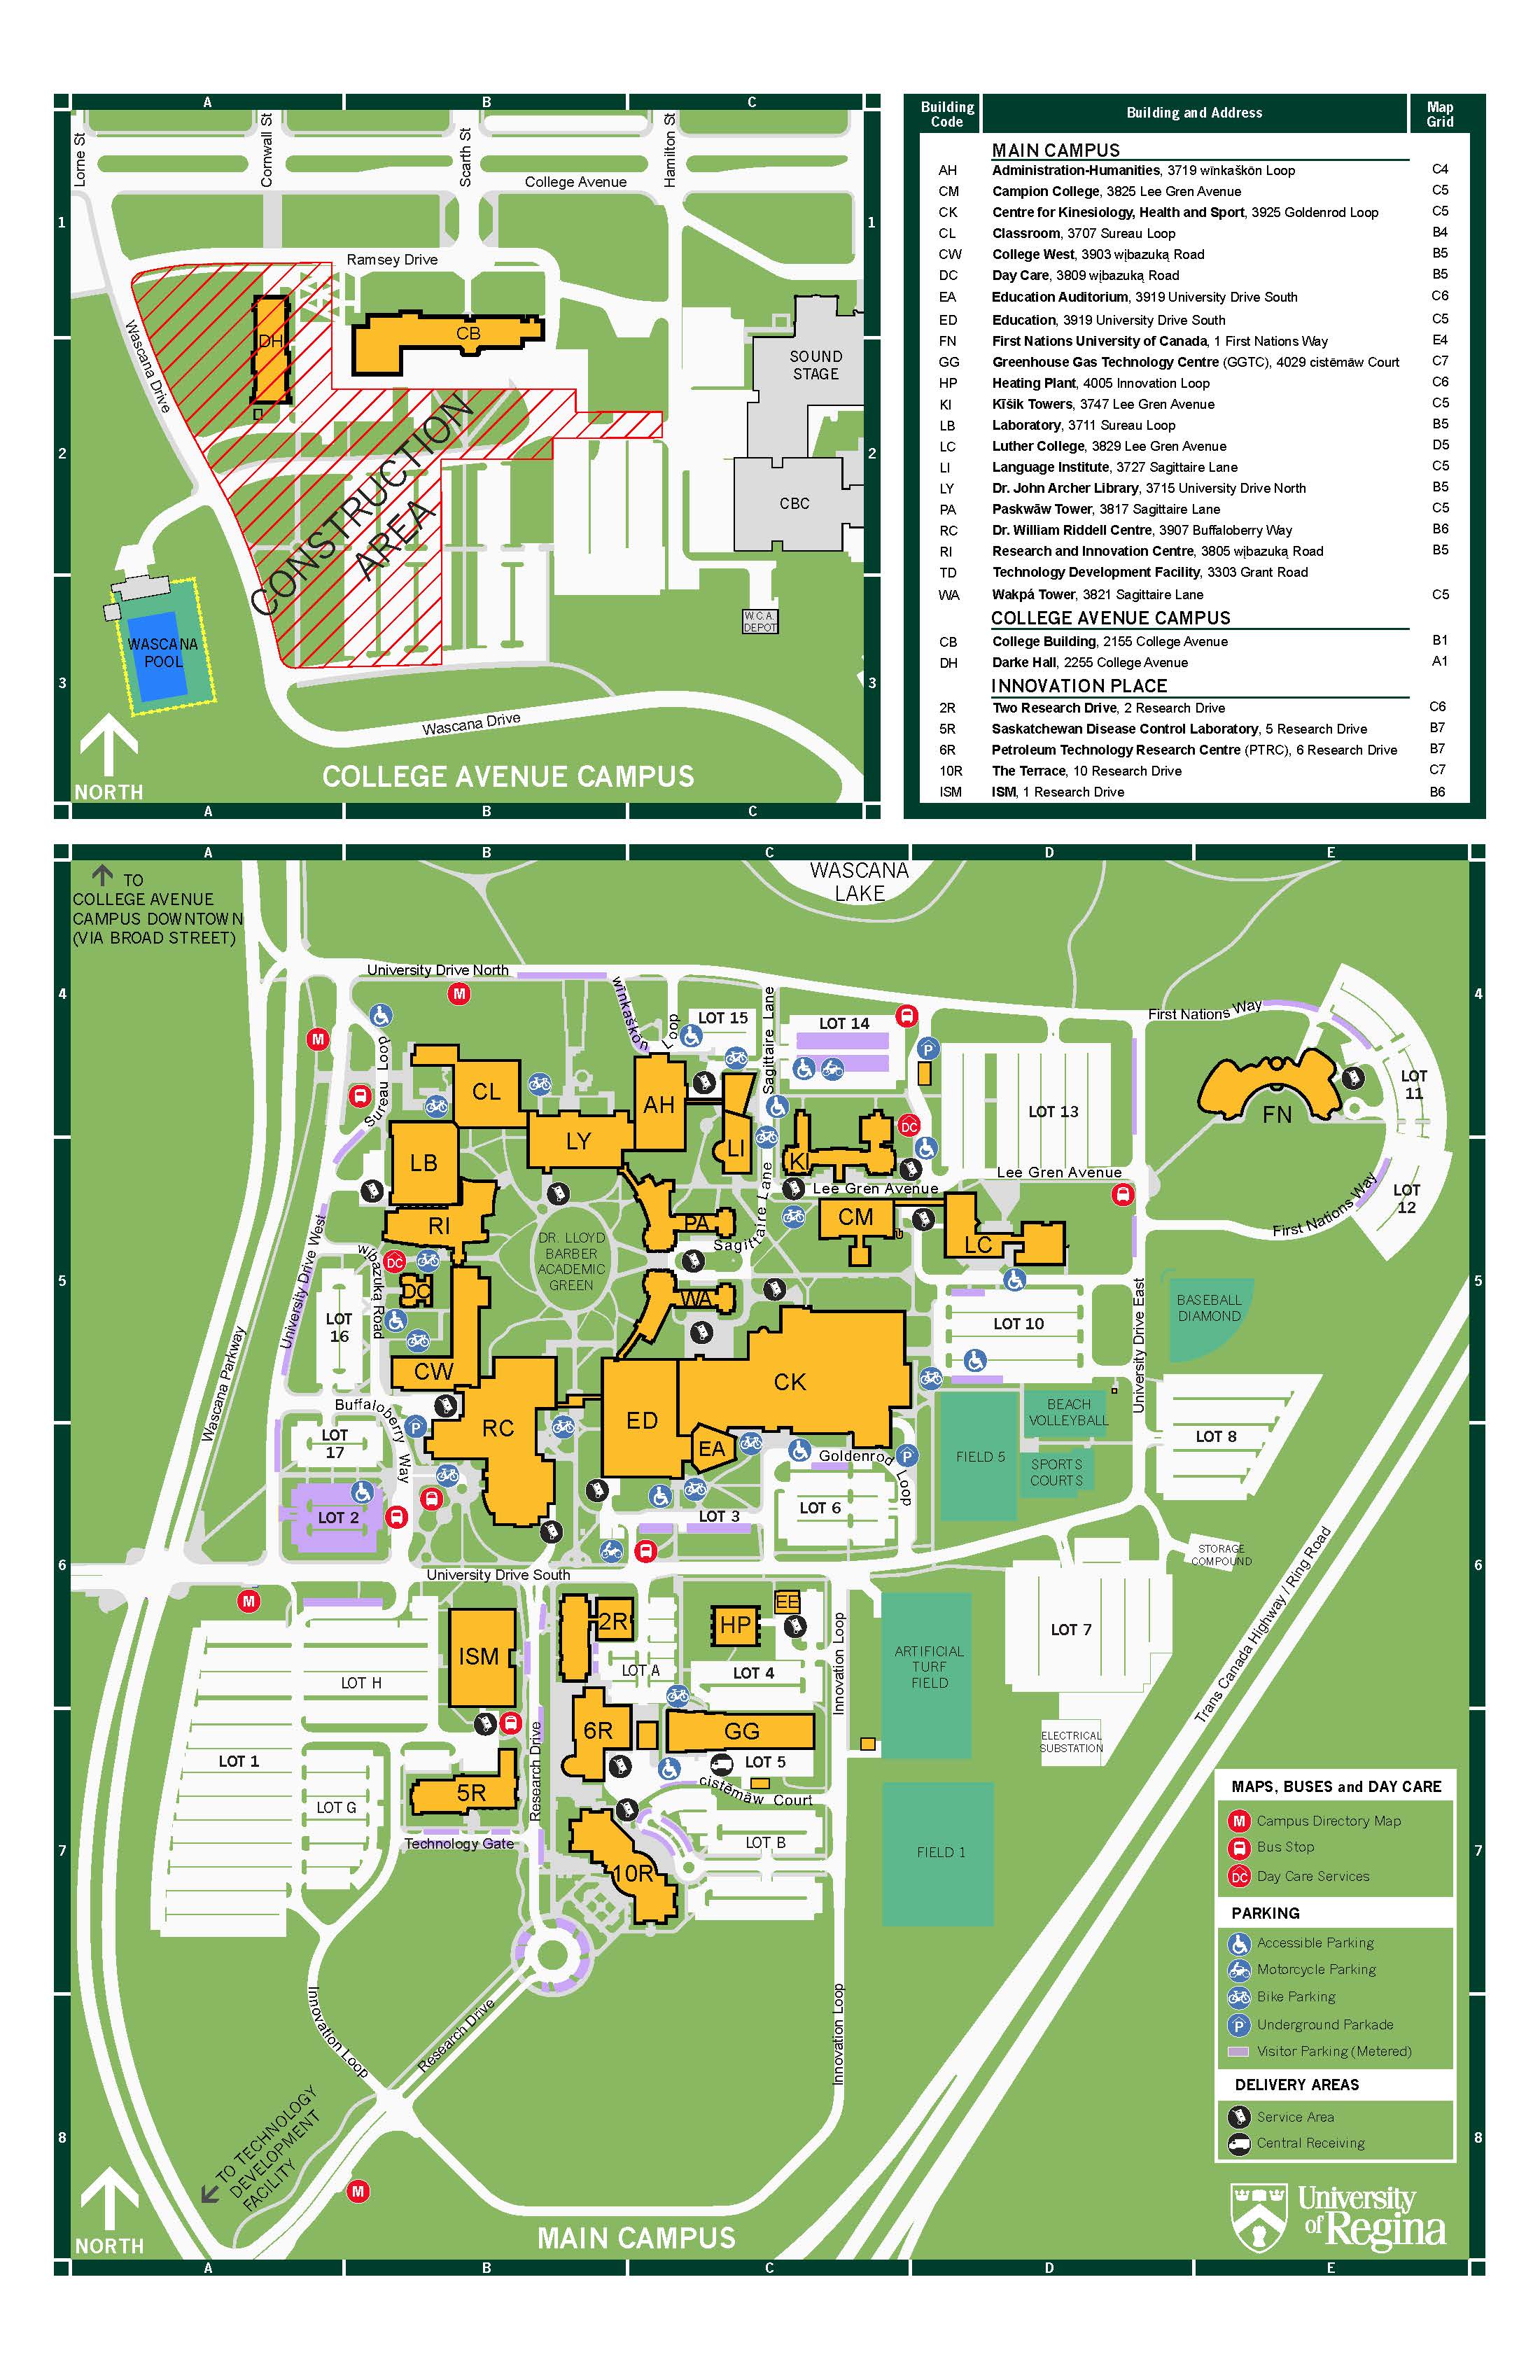 U of R Logo - Campus Maps and Directions. Contact Us, University of Regina